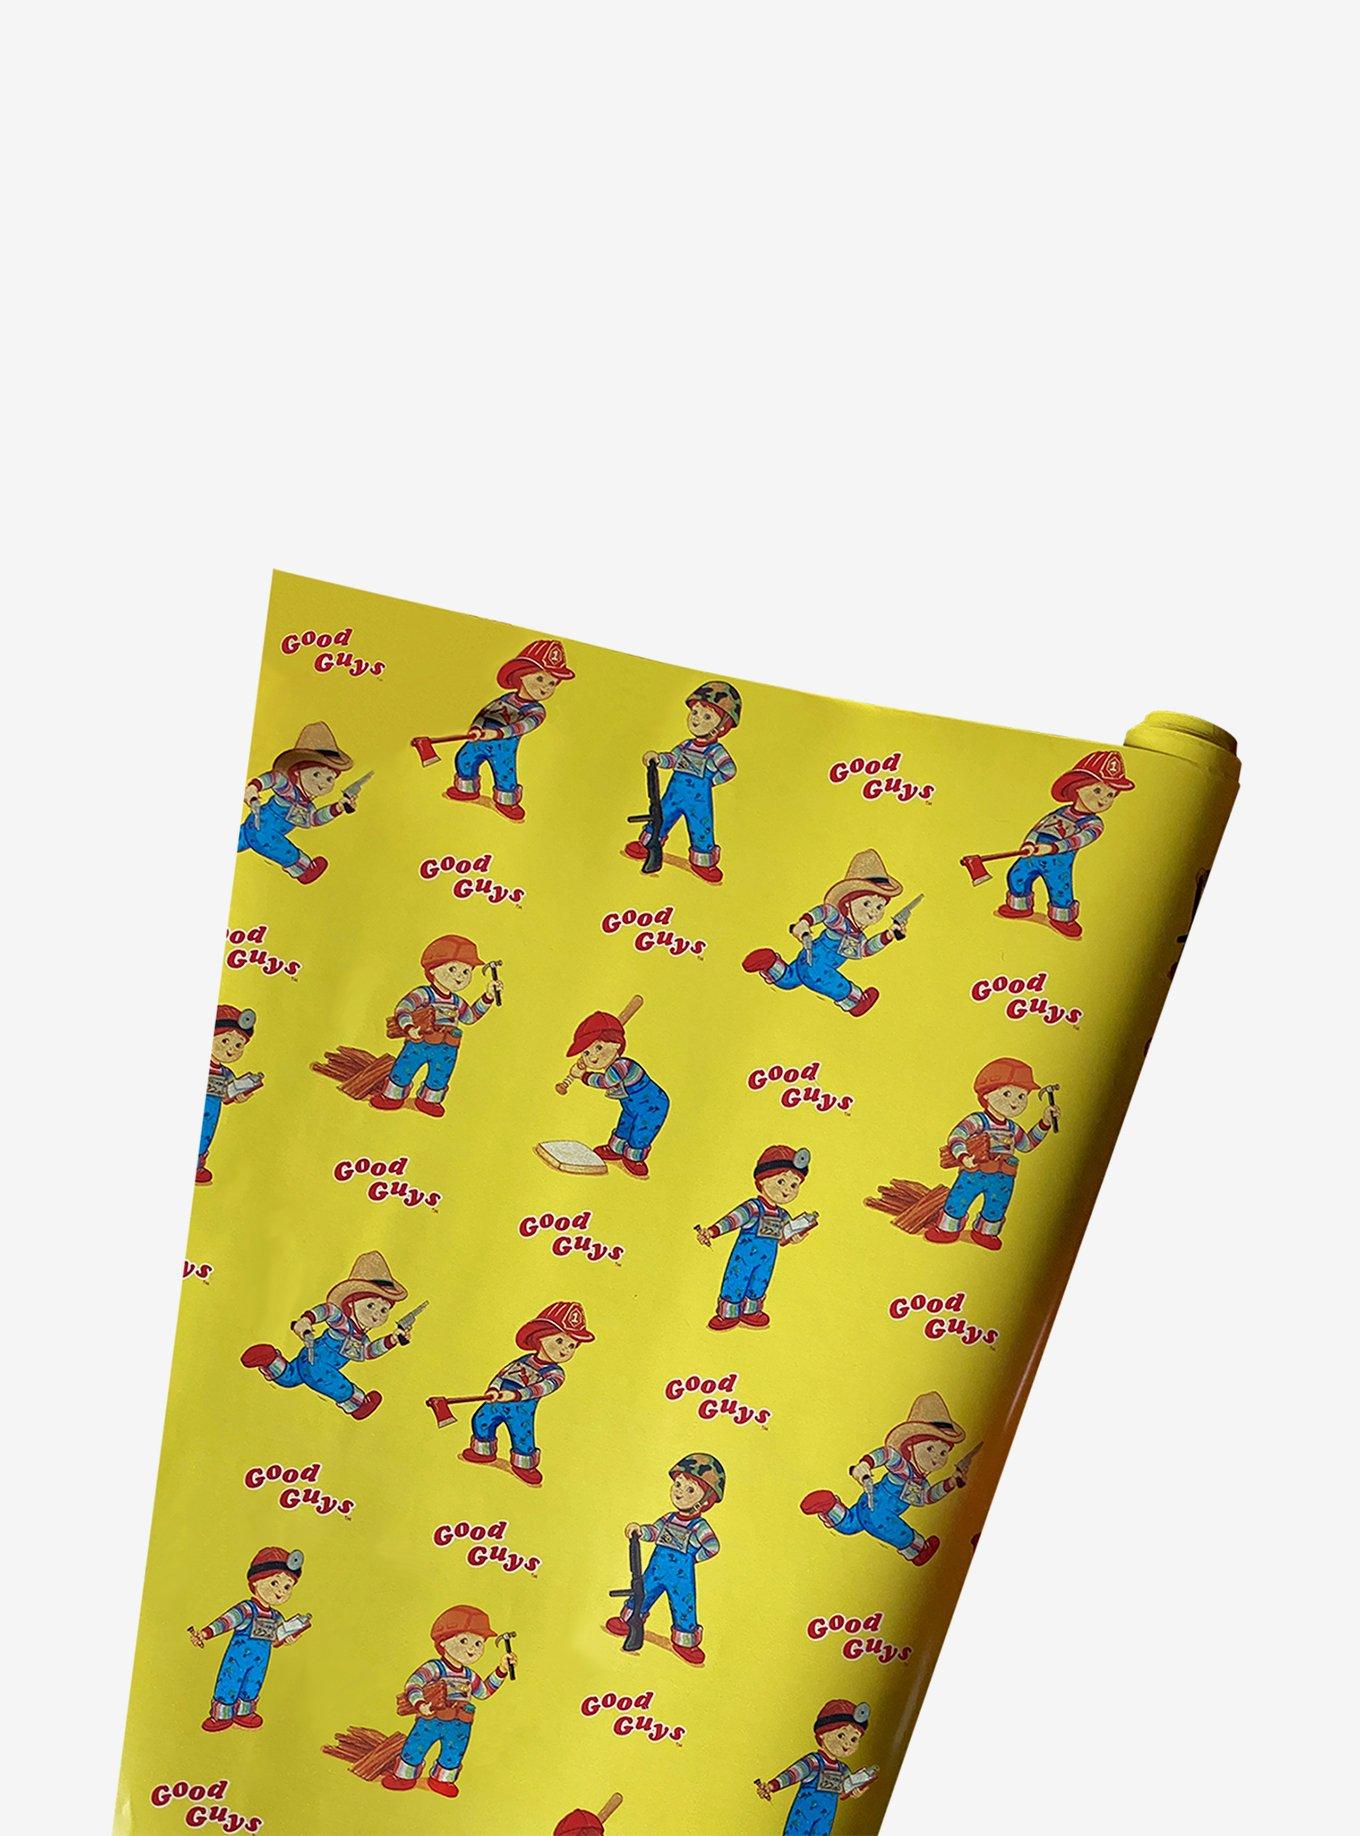 Empire Cat Wrapping Paper